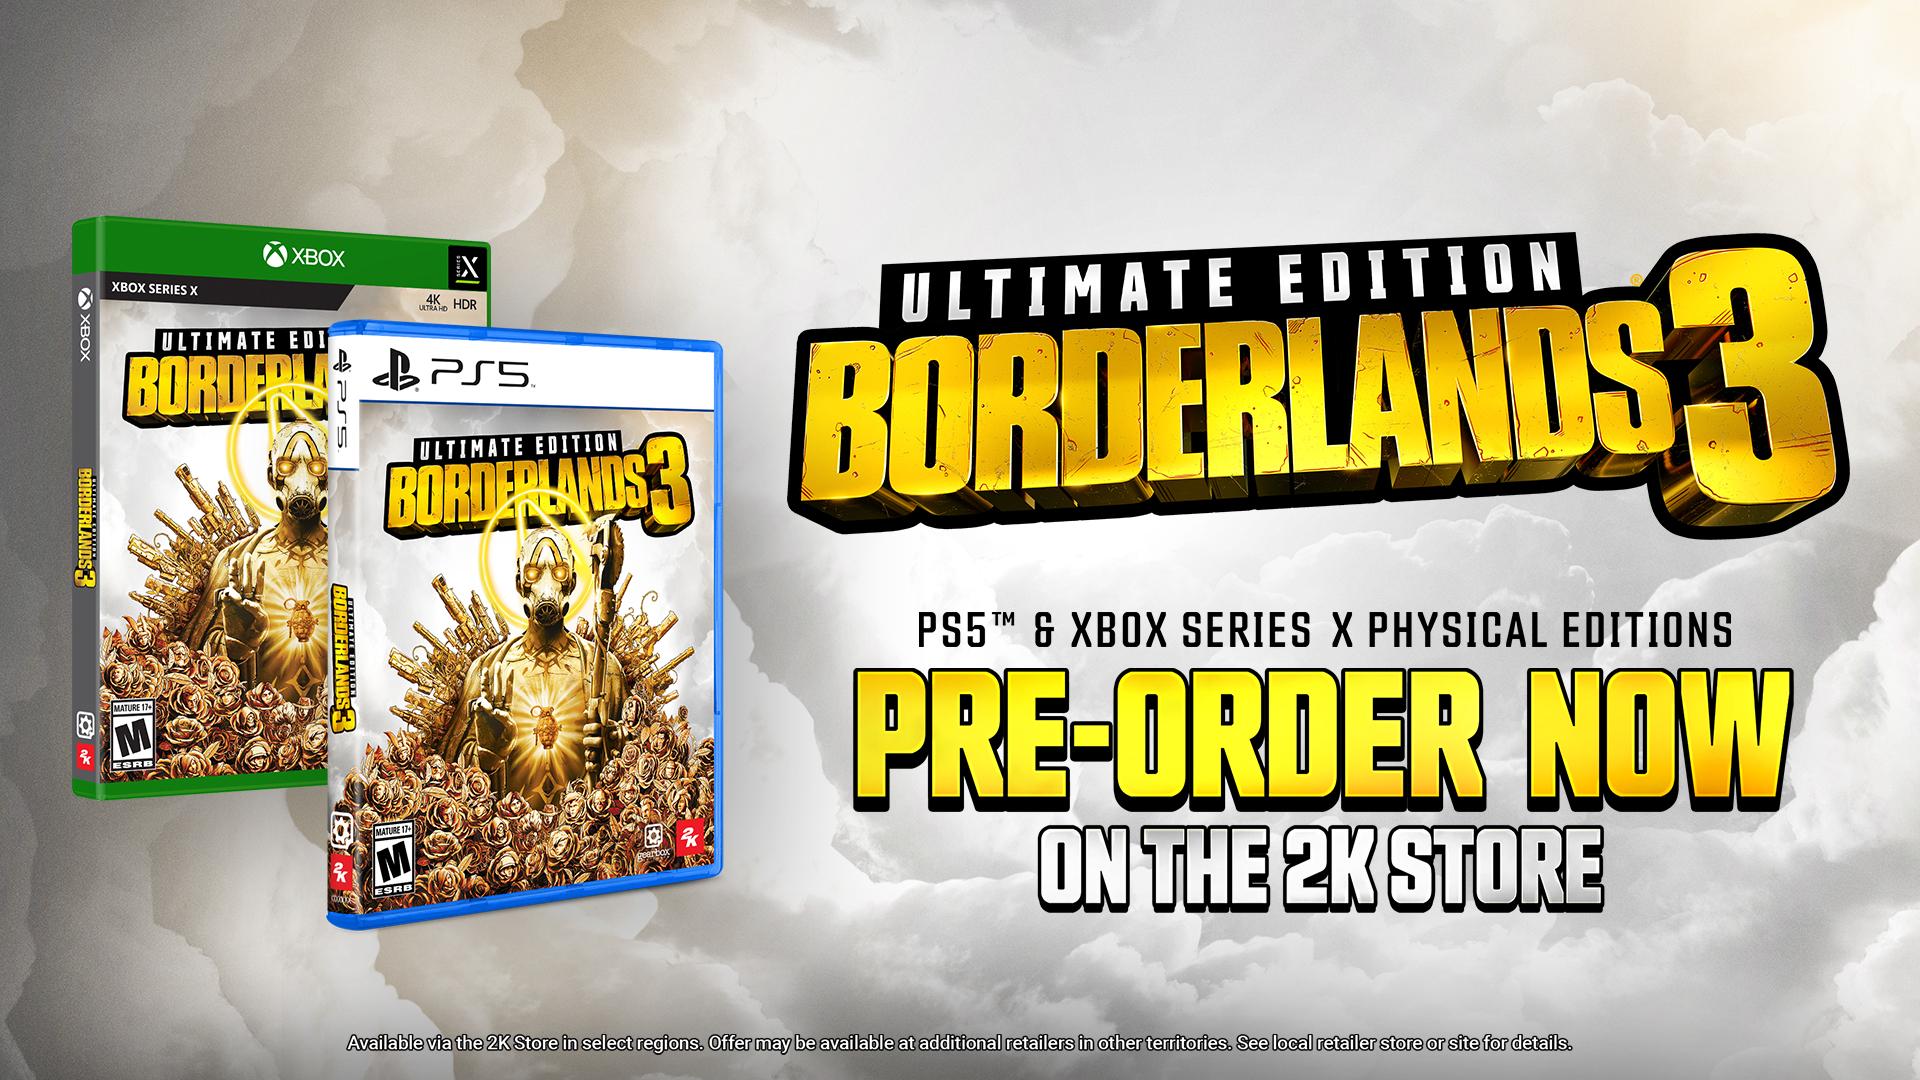 Borderlands Just In Time For The Holidays Pre Orders Are Now Live For A Limited Run Of Borderlands3 Ultimate Edition On Physical Discs For Playstation 5 And Xbox Series X In